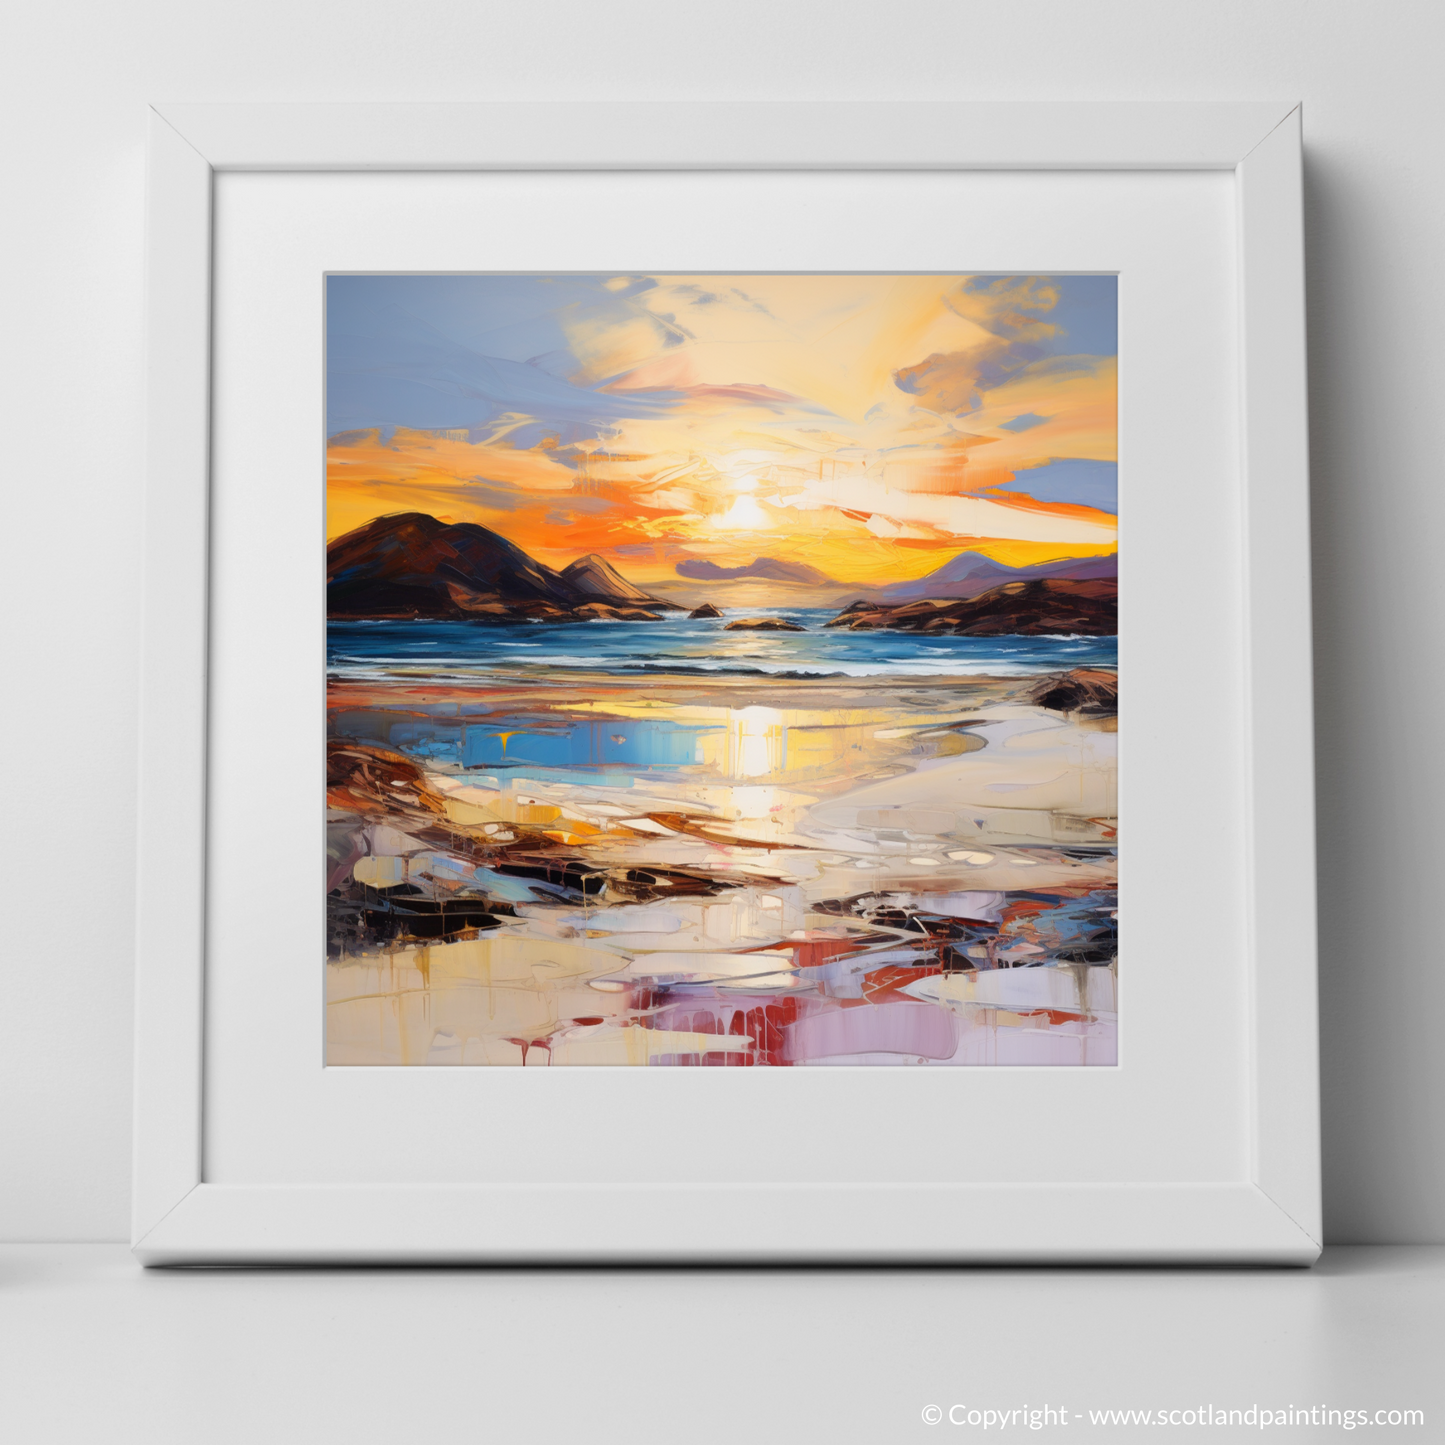 Art Print of Traigh Mhor at sunset with a white frame